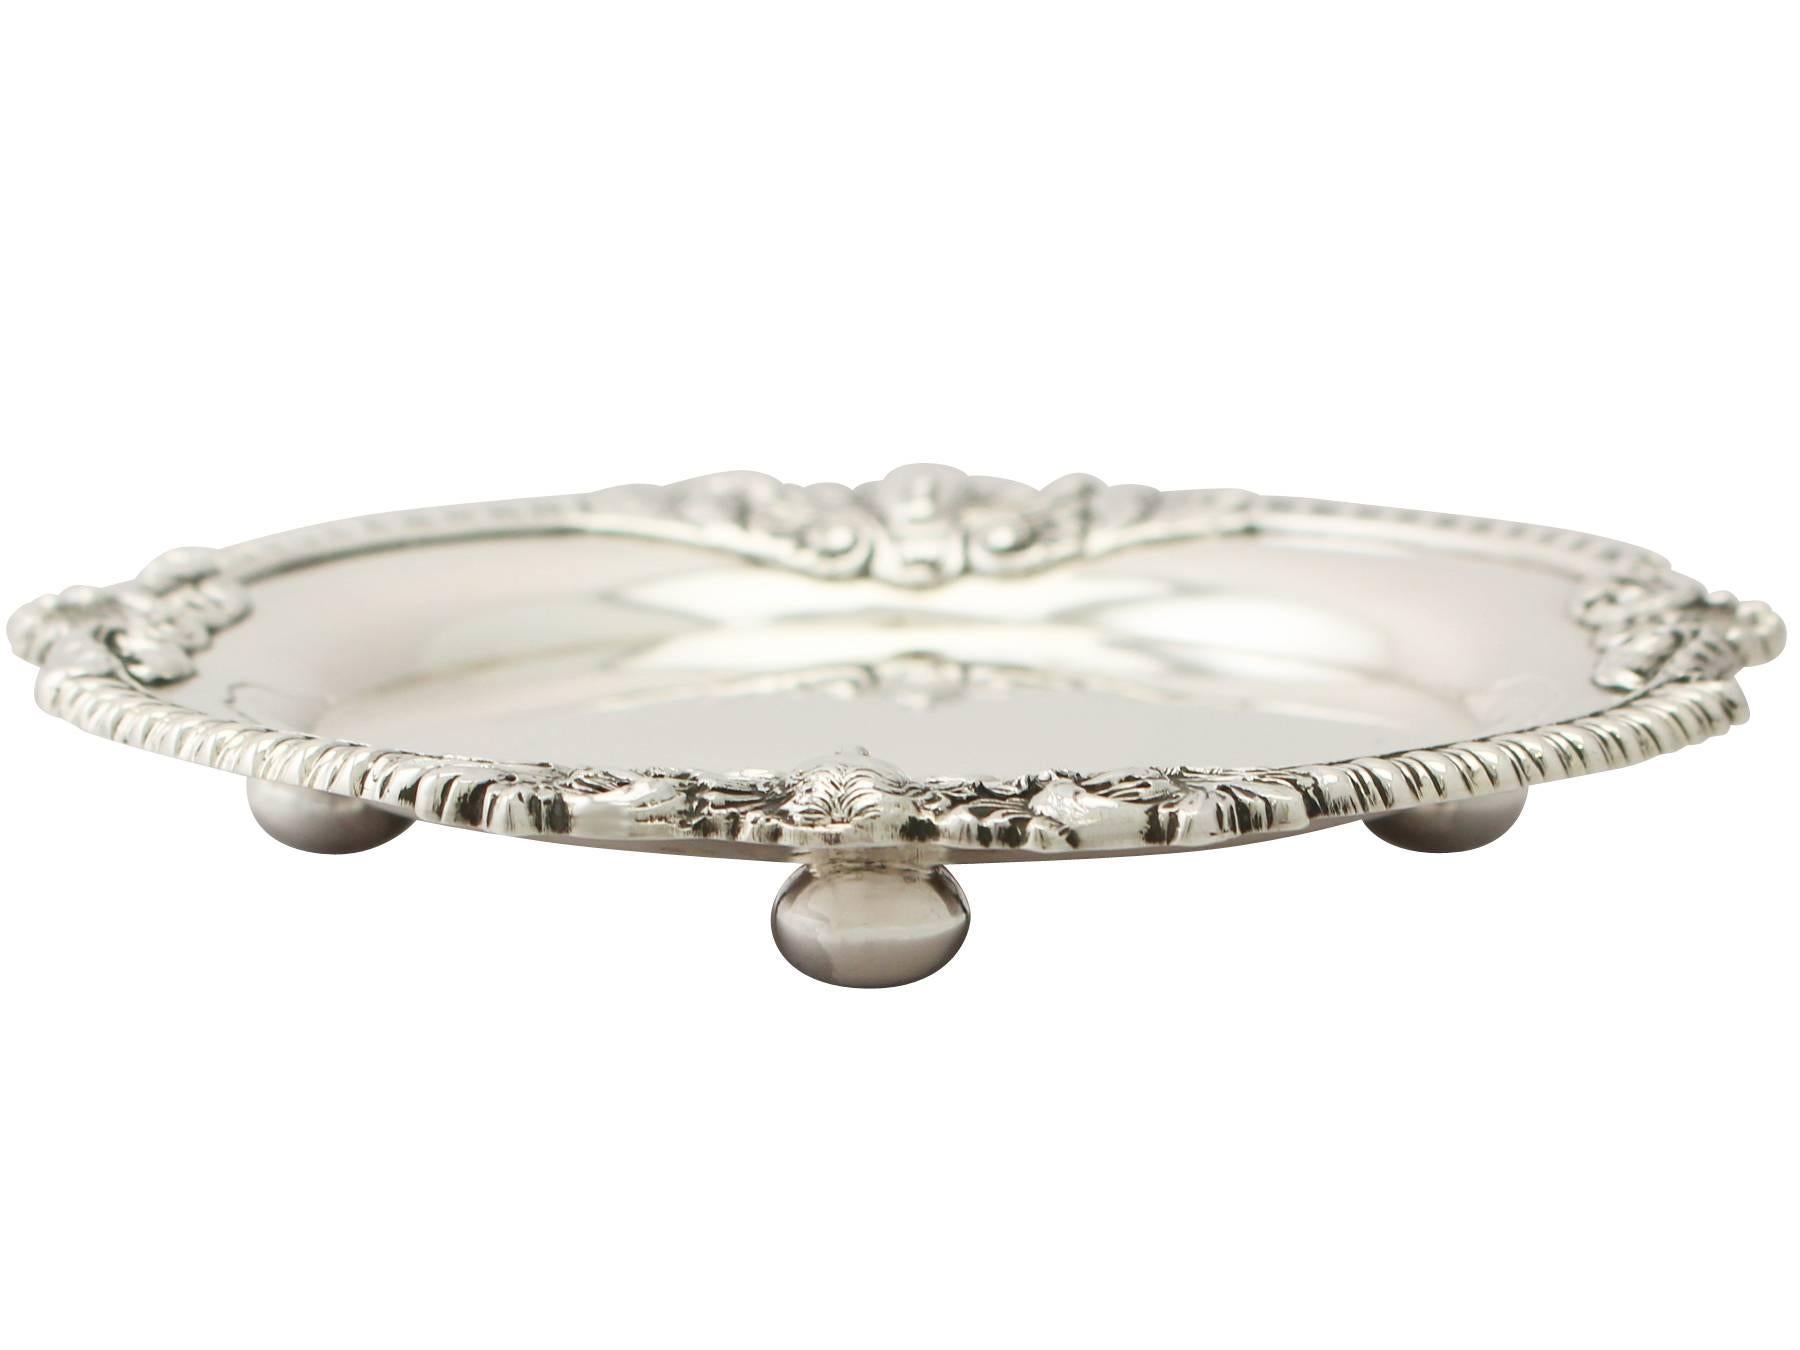 English Antique Regency Style Sterling Silver Waiter